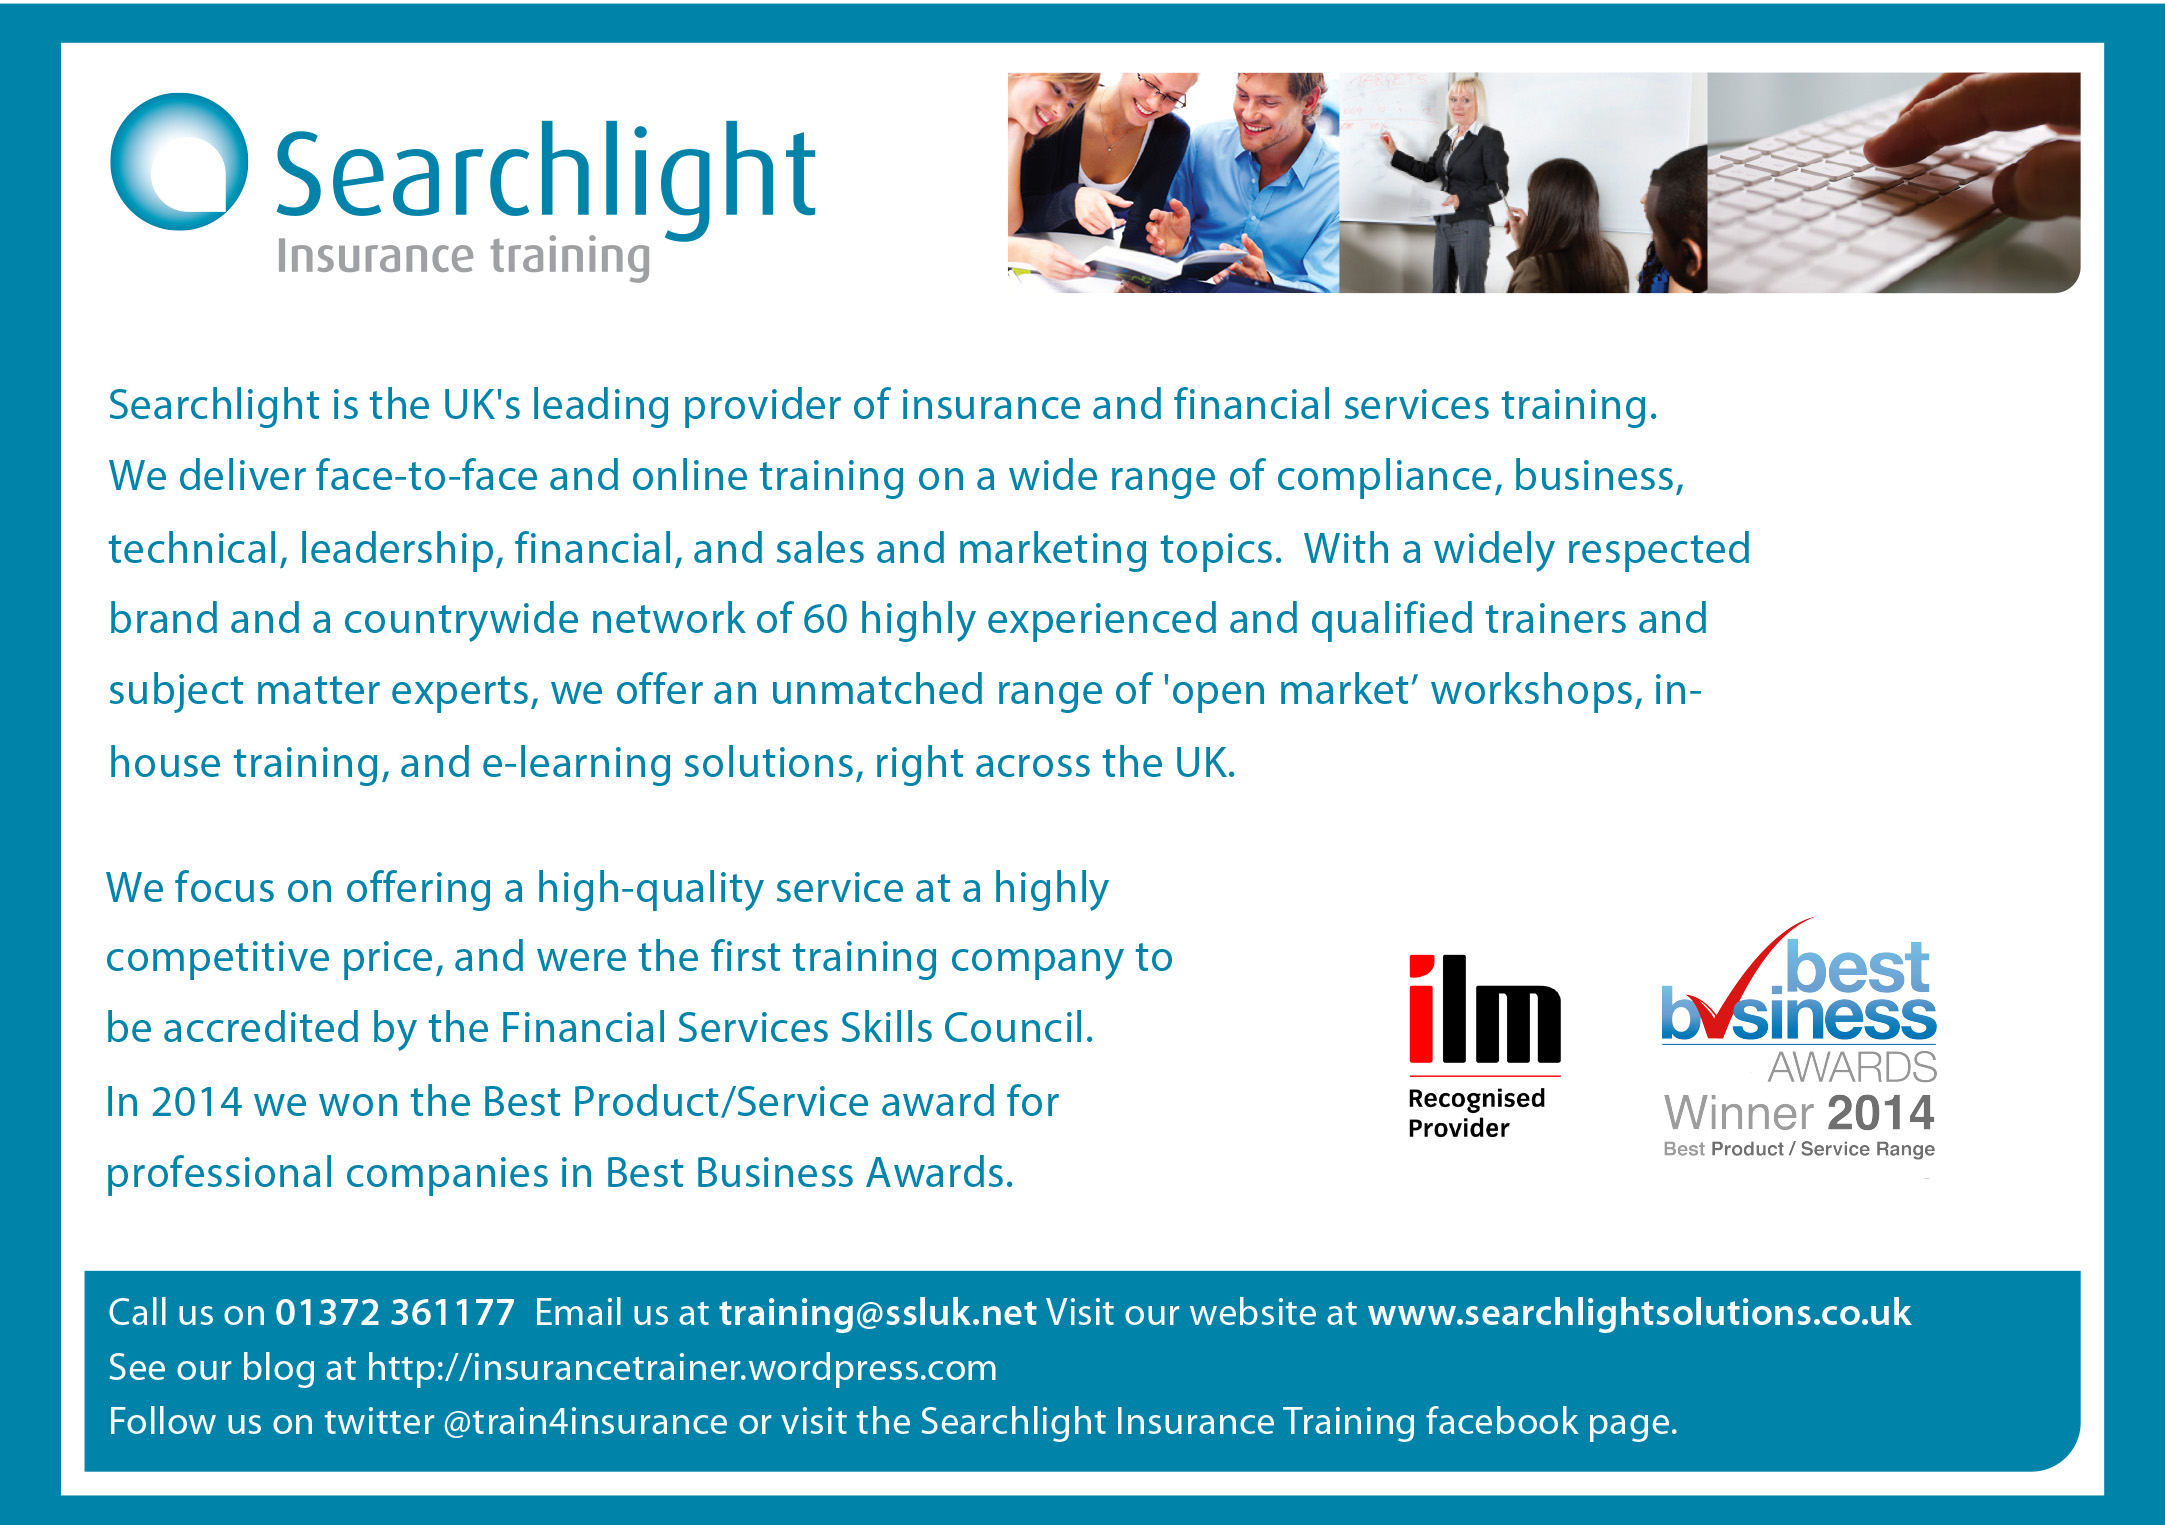 Searchlight is the UK's leading orovider of insurance and financial services training